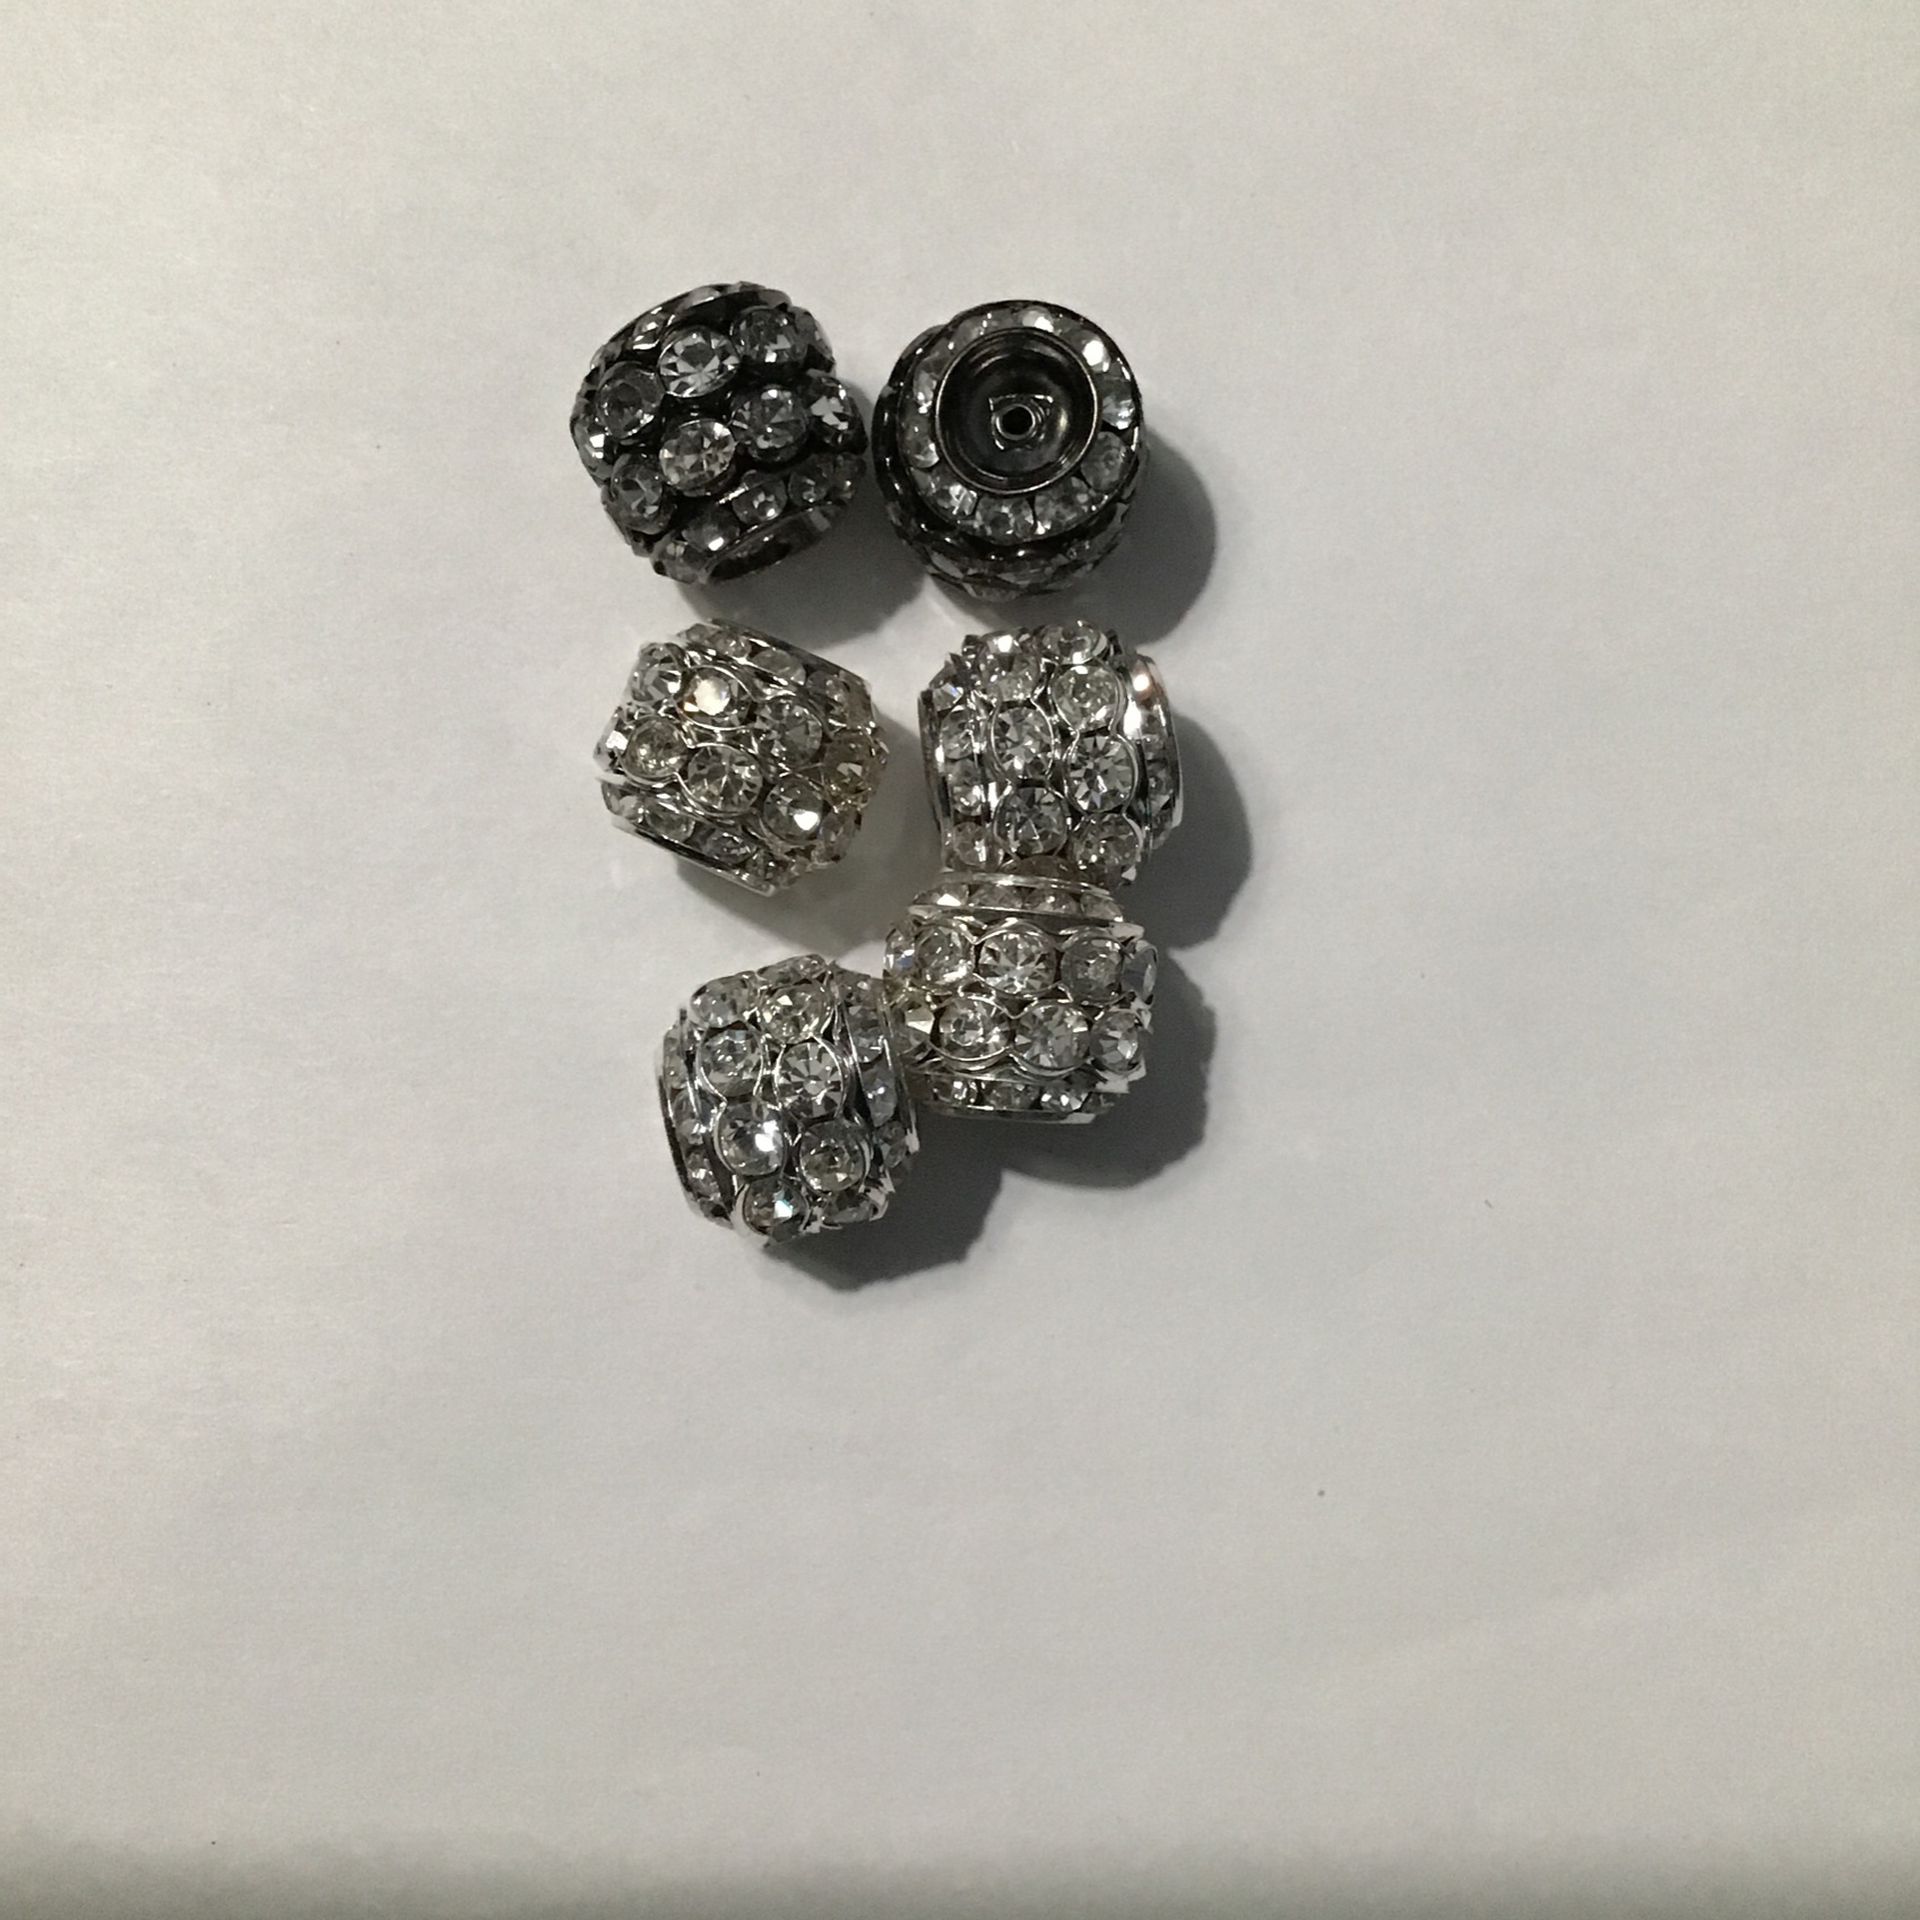 Large Crystal Rondelle Spacer Beads. $4.00